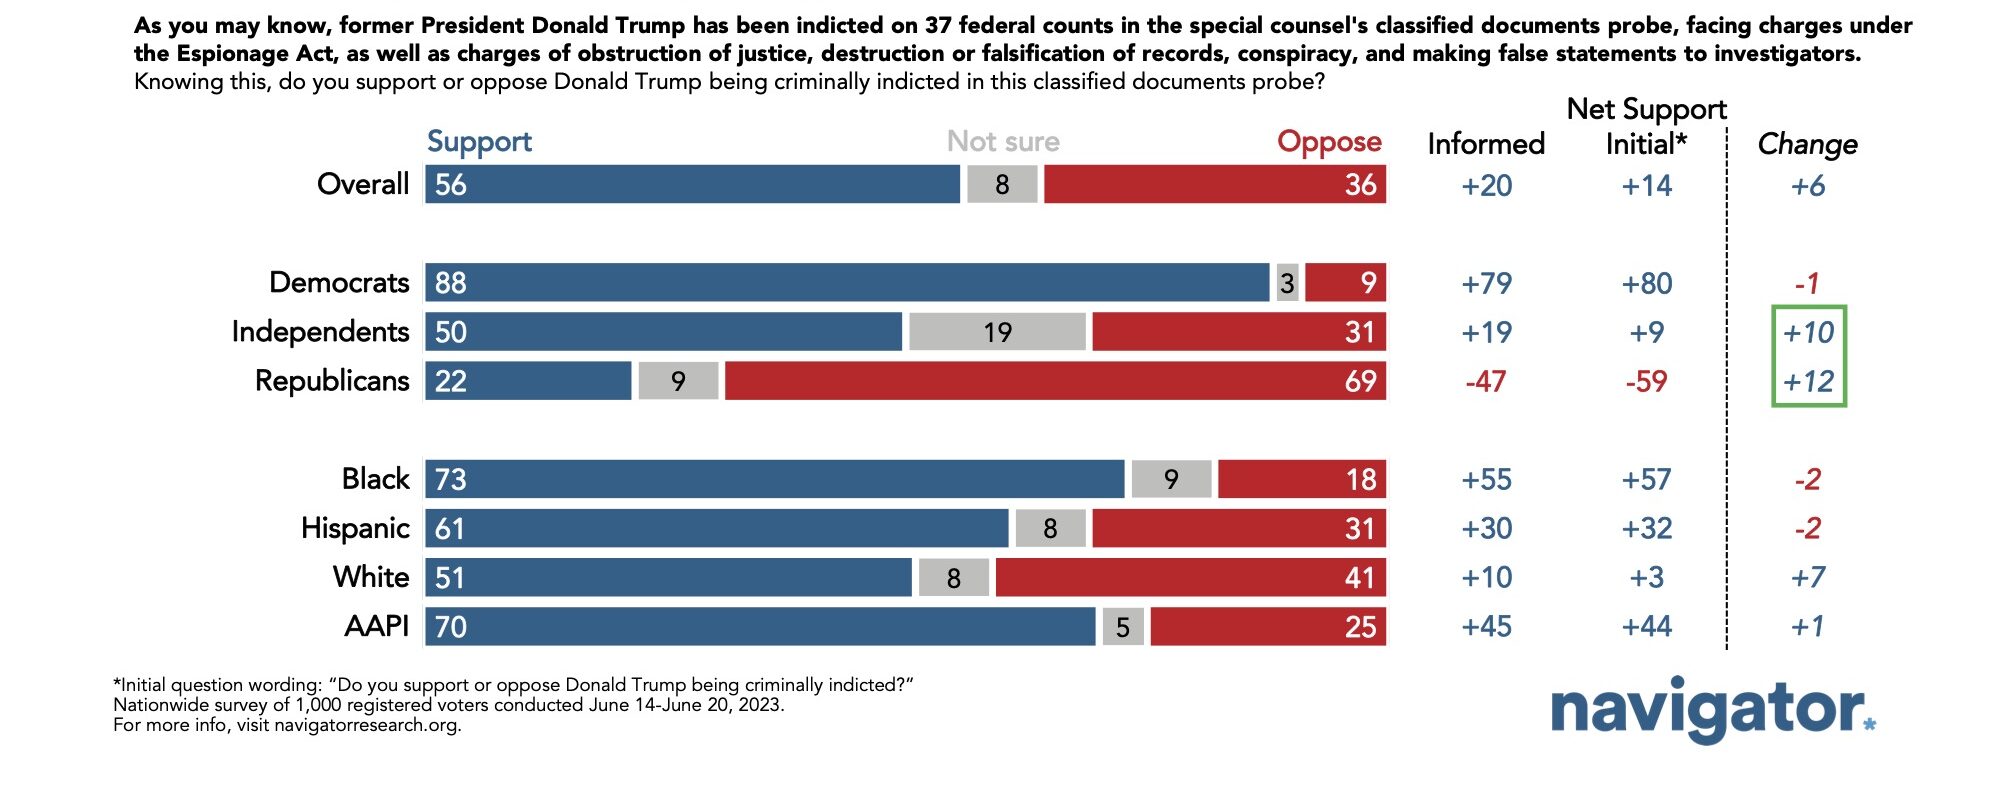 Bar graphs showing survey results to the following question after Donald Trump's indictment: As you may know, former President Donald Trump has been indicted on 37 federal counts in the special counsel's classified documents probe, facing charges under the Espionage Act, as well as charges of obstruction of justice, destruction or falsification of records, conspiracy, and making false statements to investigators. Knowing this, do you support or oppose Donald Trump being criminally indicted in this classified documents probe?